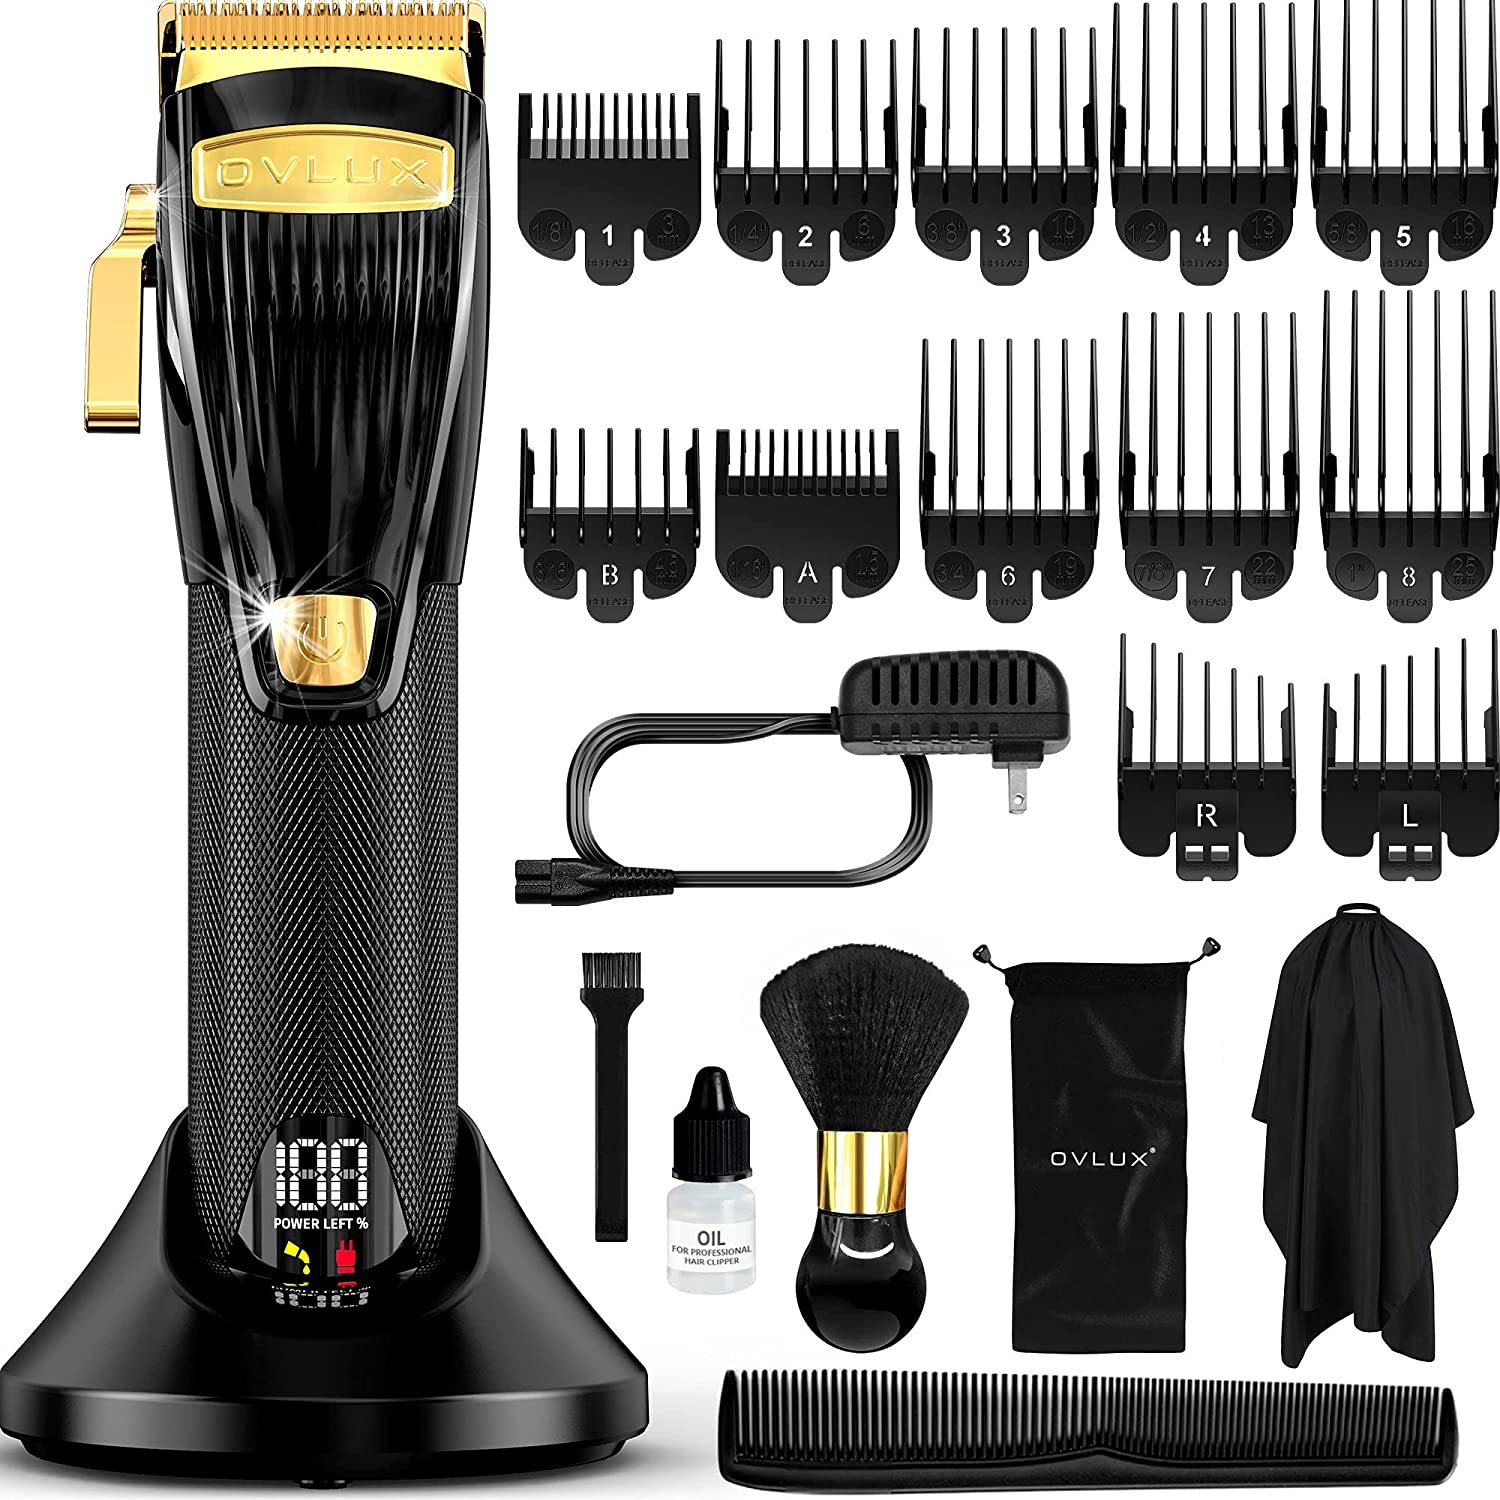 OVLUX Professional Hair Clippers for Men - Rechargeable Electric Cordless, 2mm - $63.99